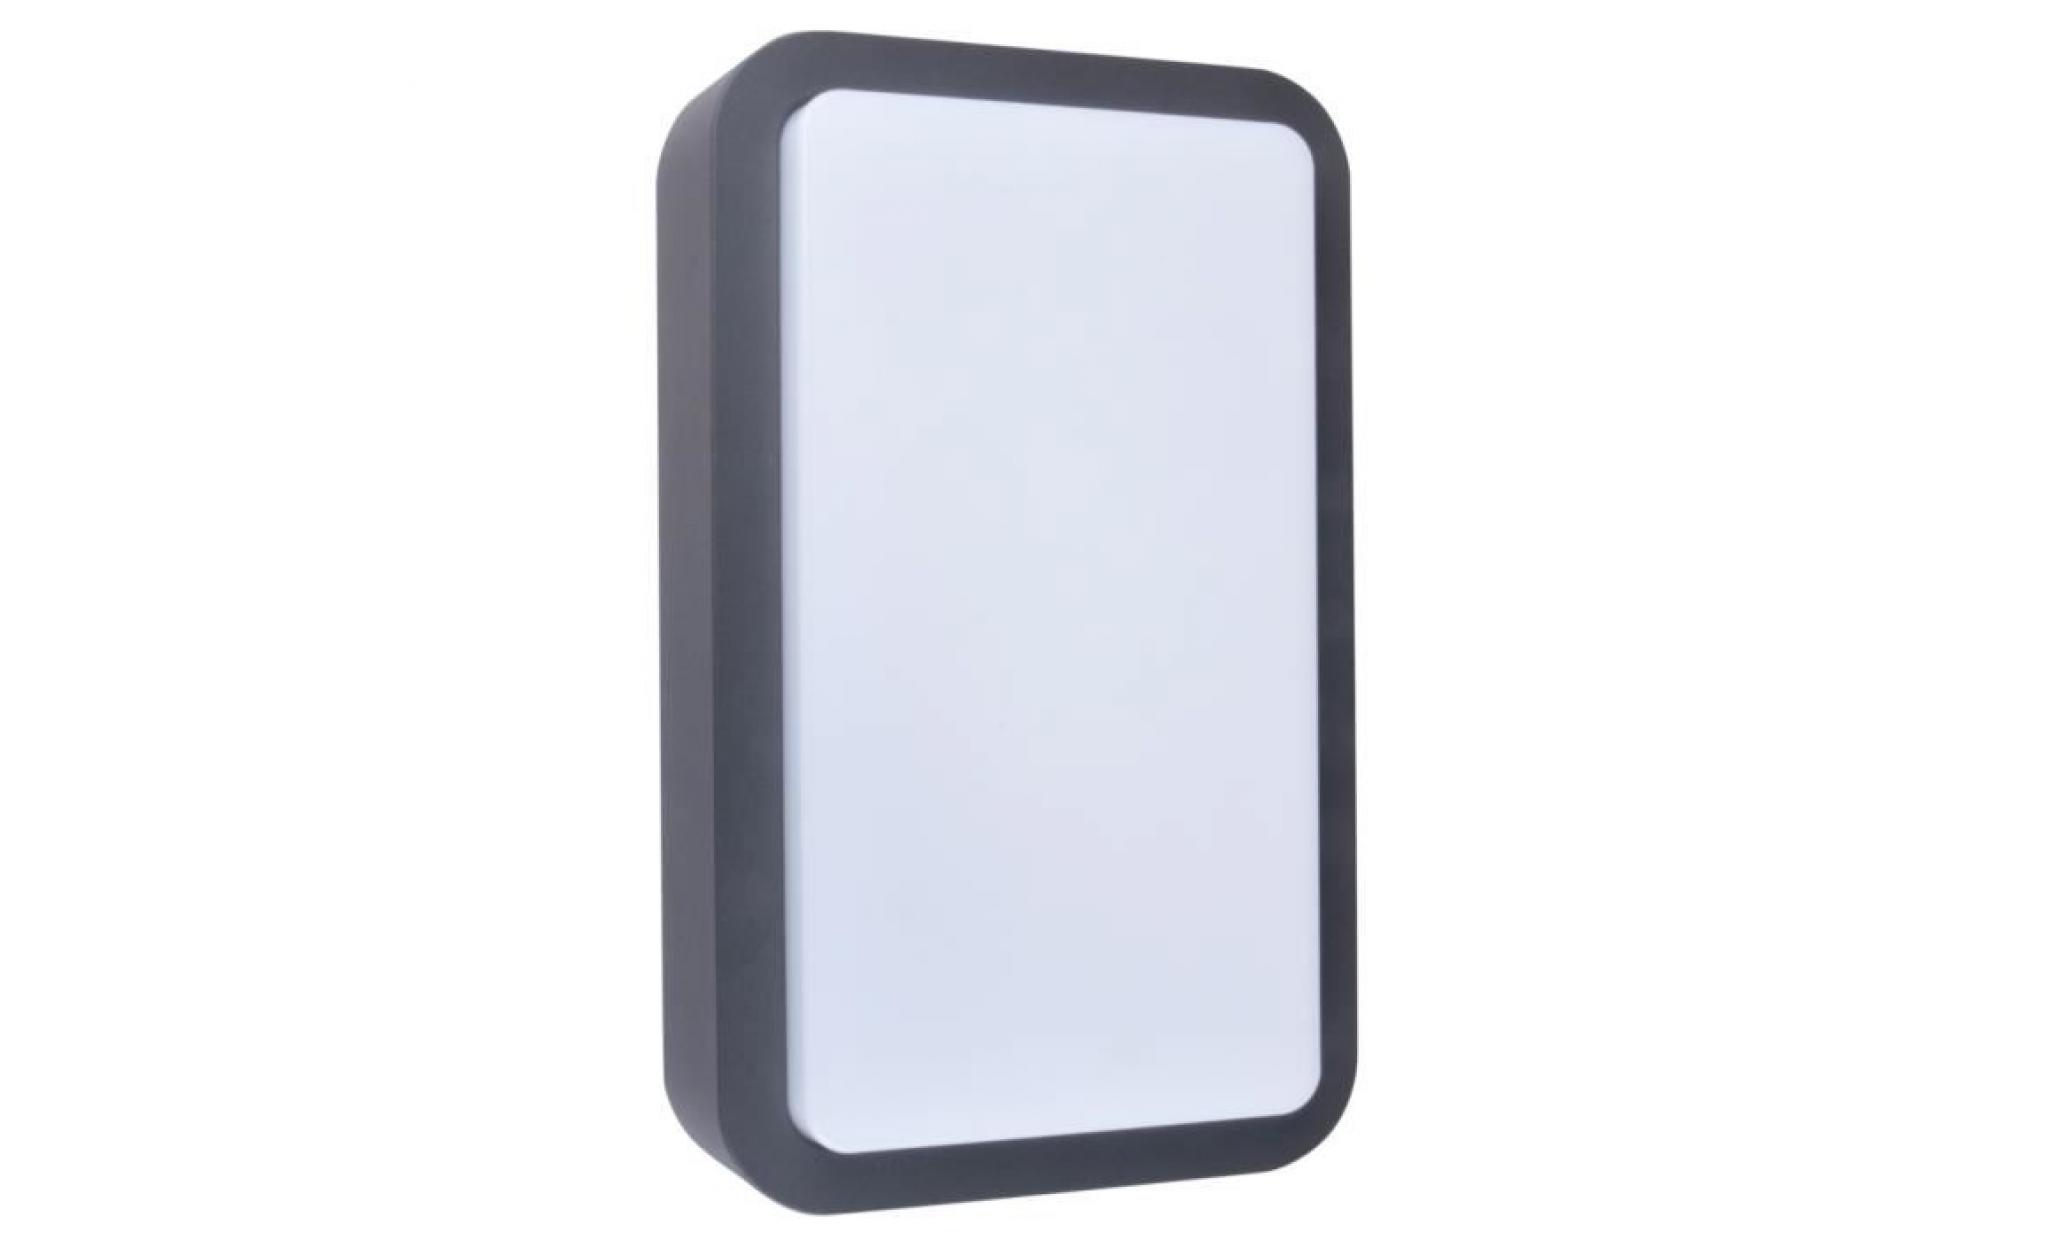 lampe murales lampe murale led 7 w anthracite gwi 001 hs pas cher